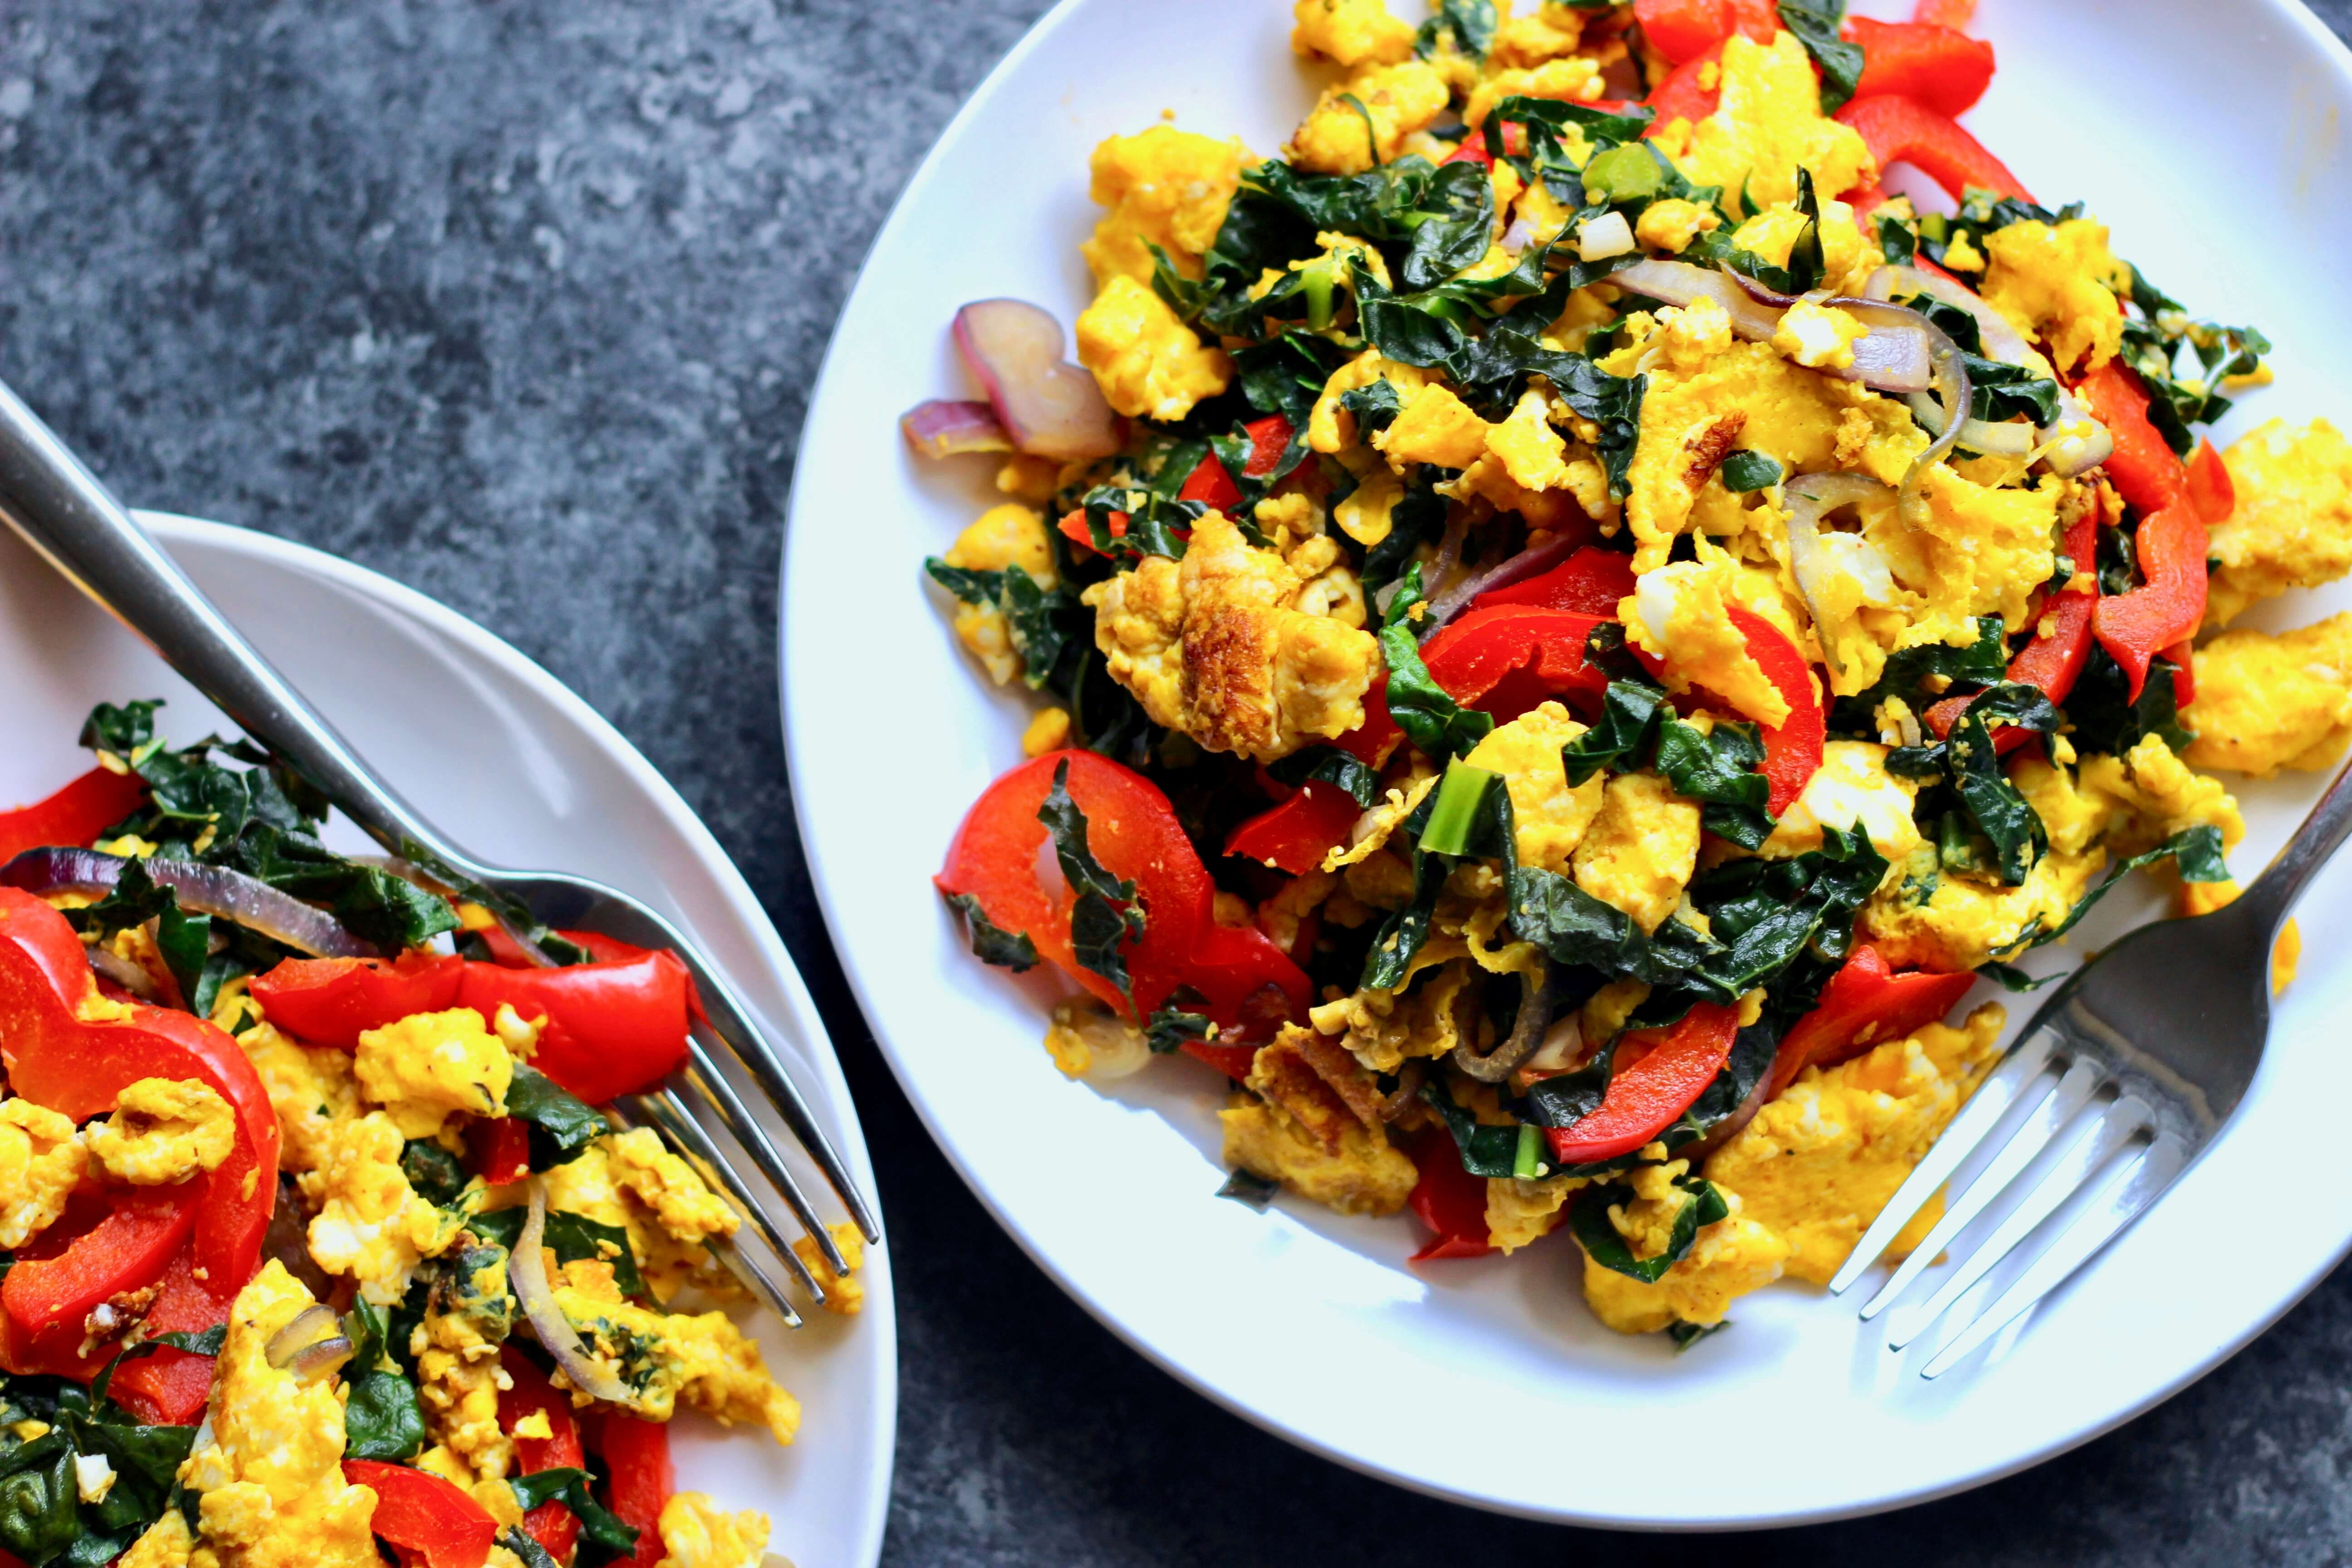 Healthy $4 Dinners to Add to Your Client's Meal Plan: Scrambled Eggs with Peppers and Kale